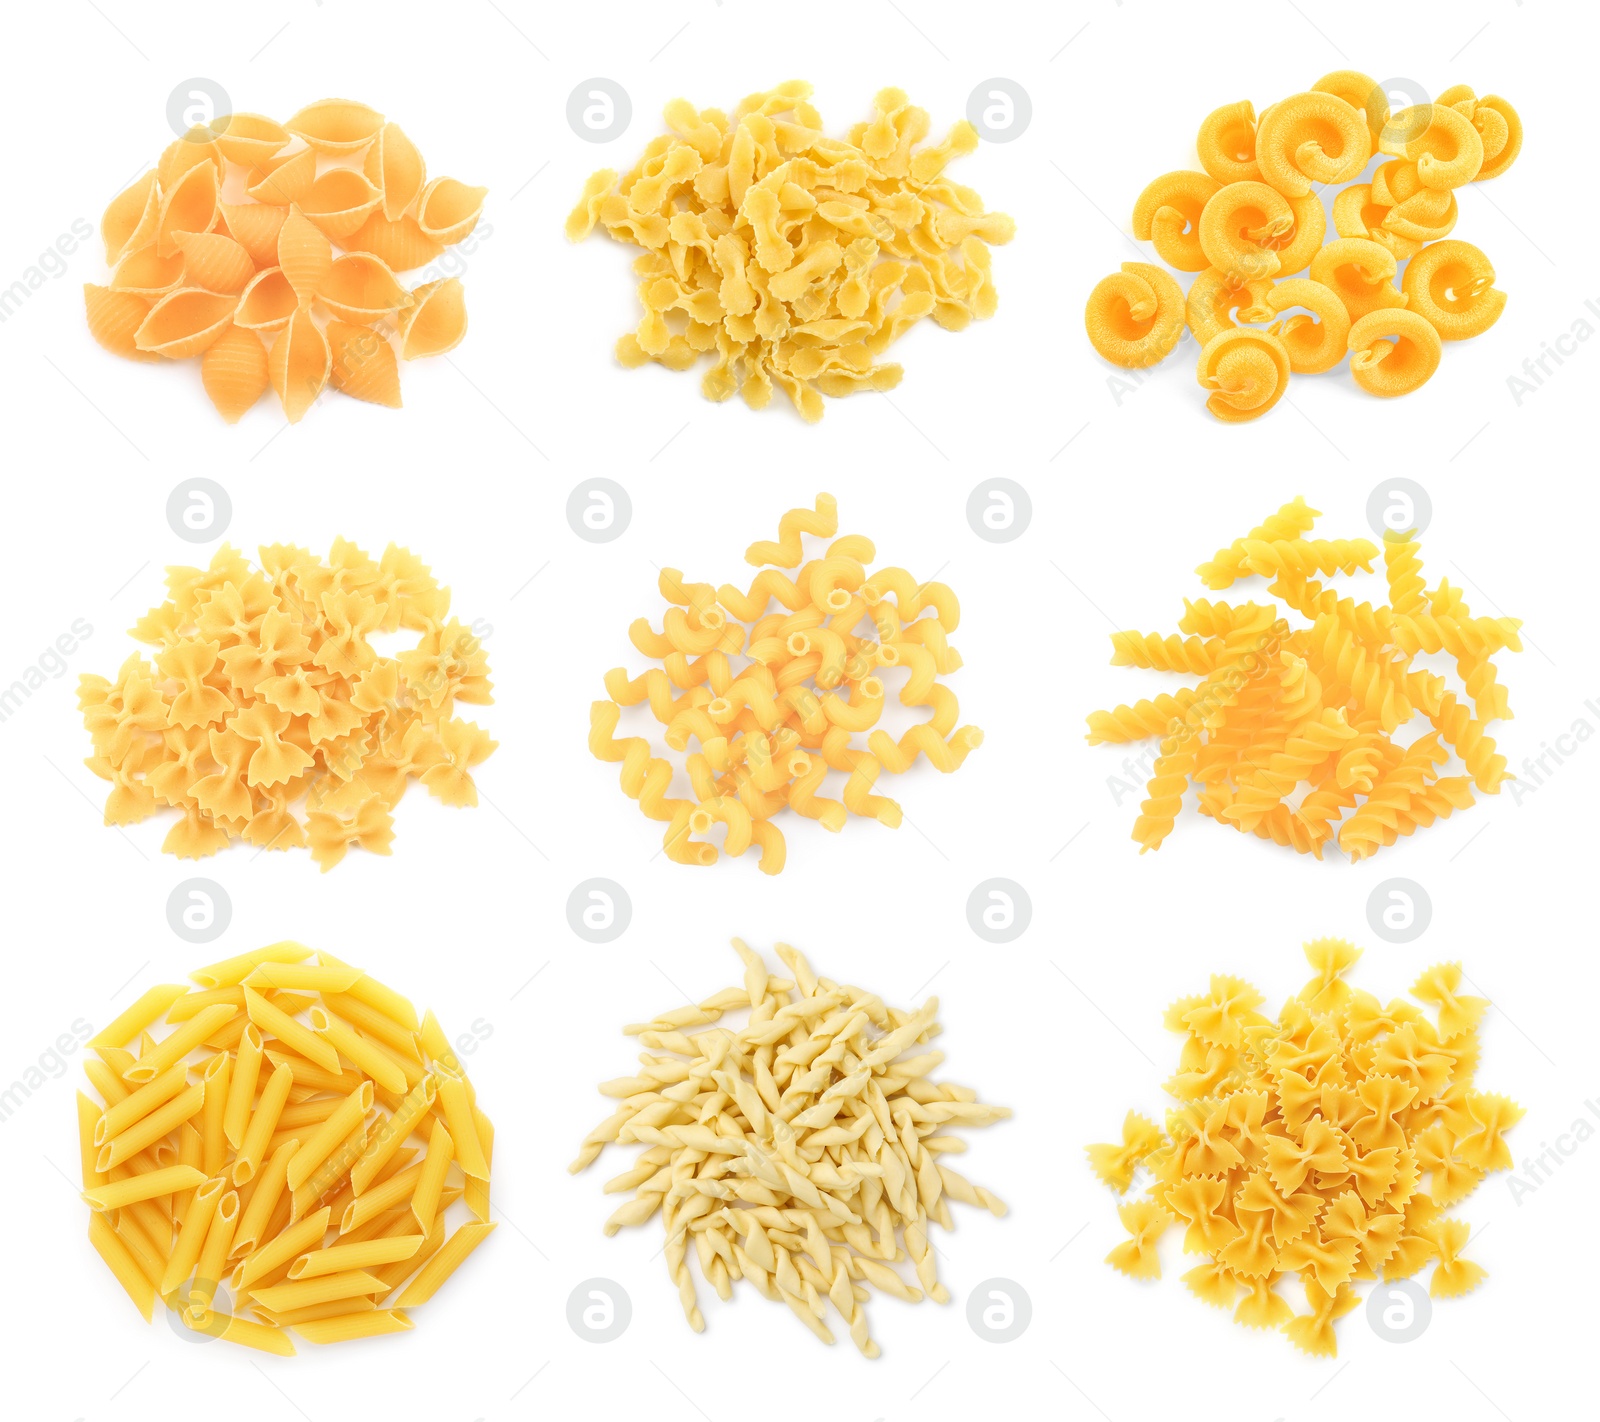 Image of Different types of pasta isolated on white, top view